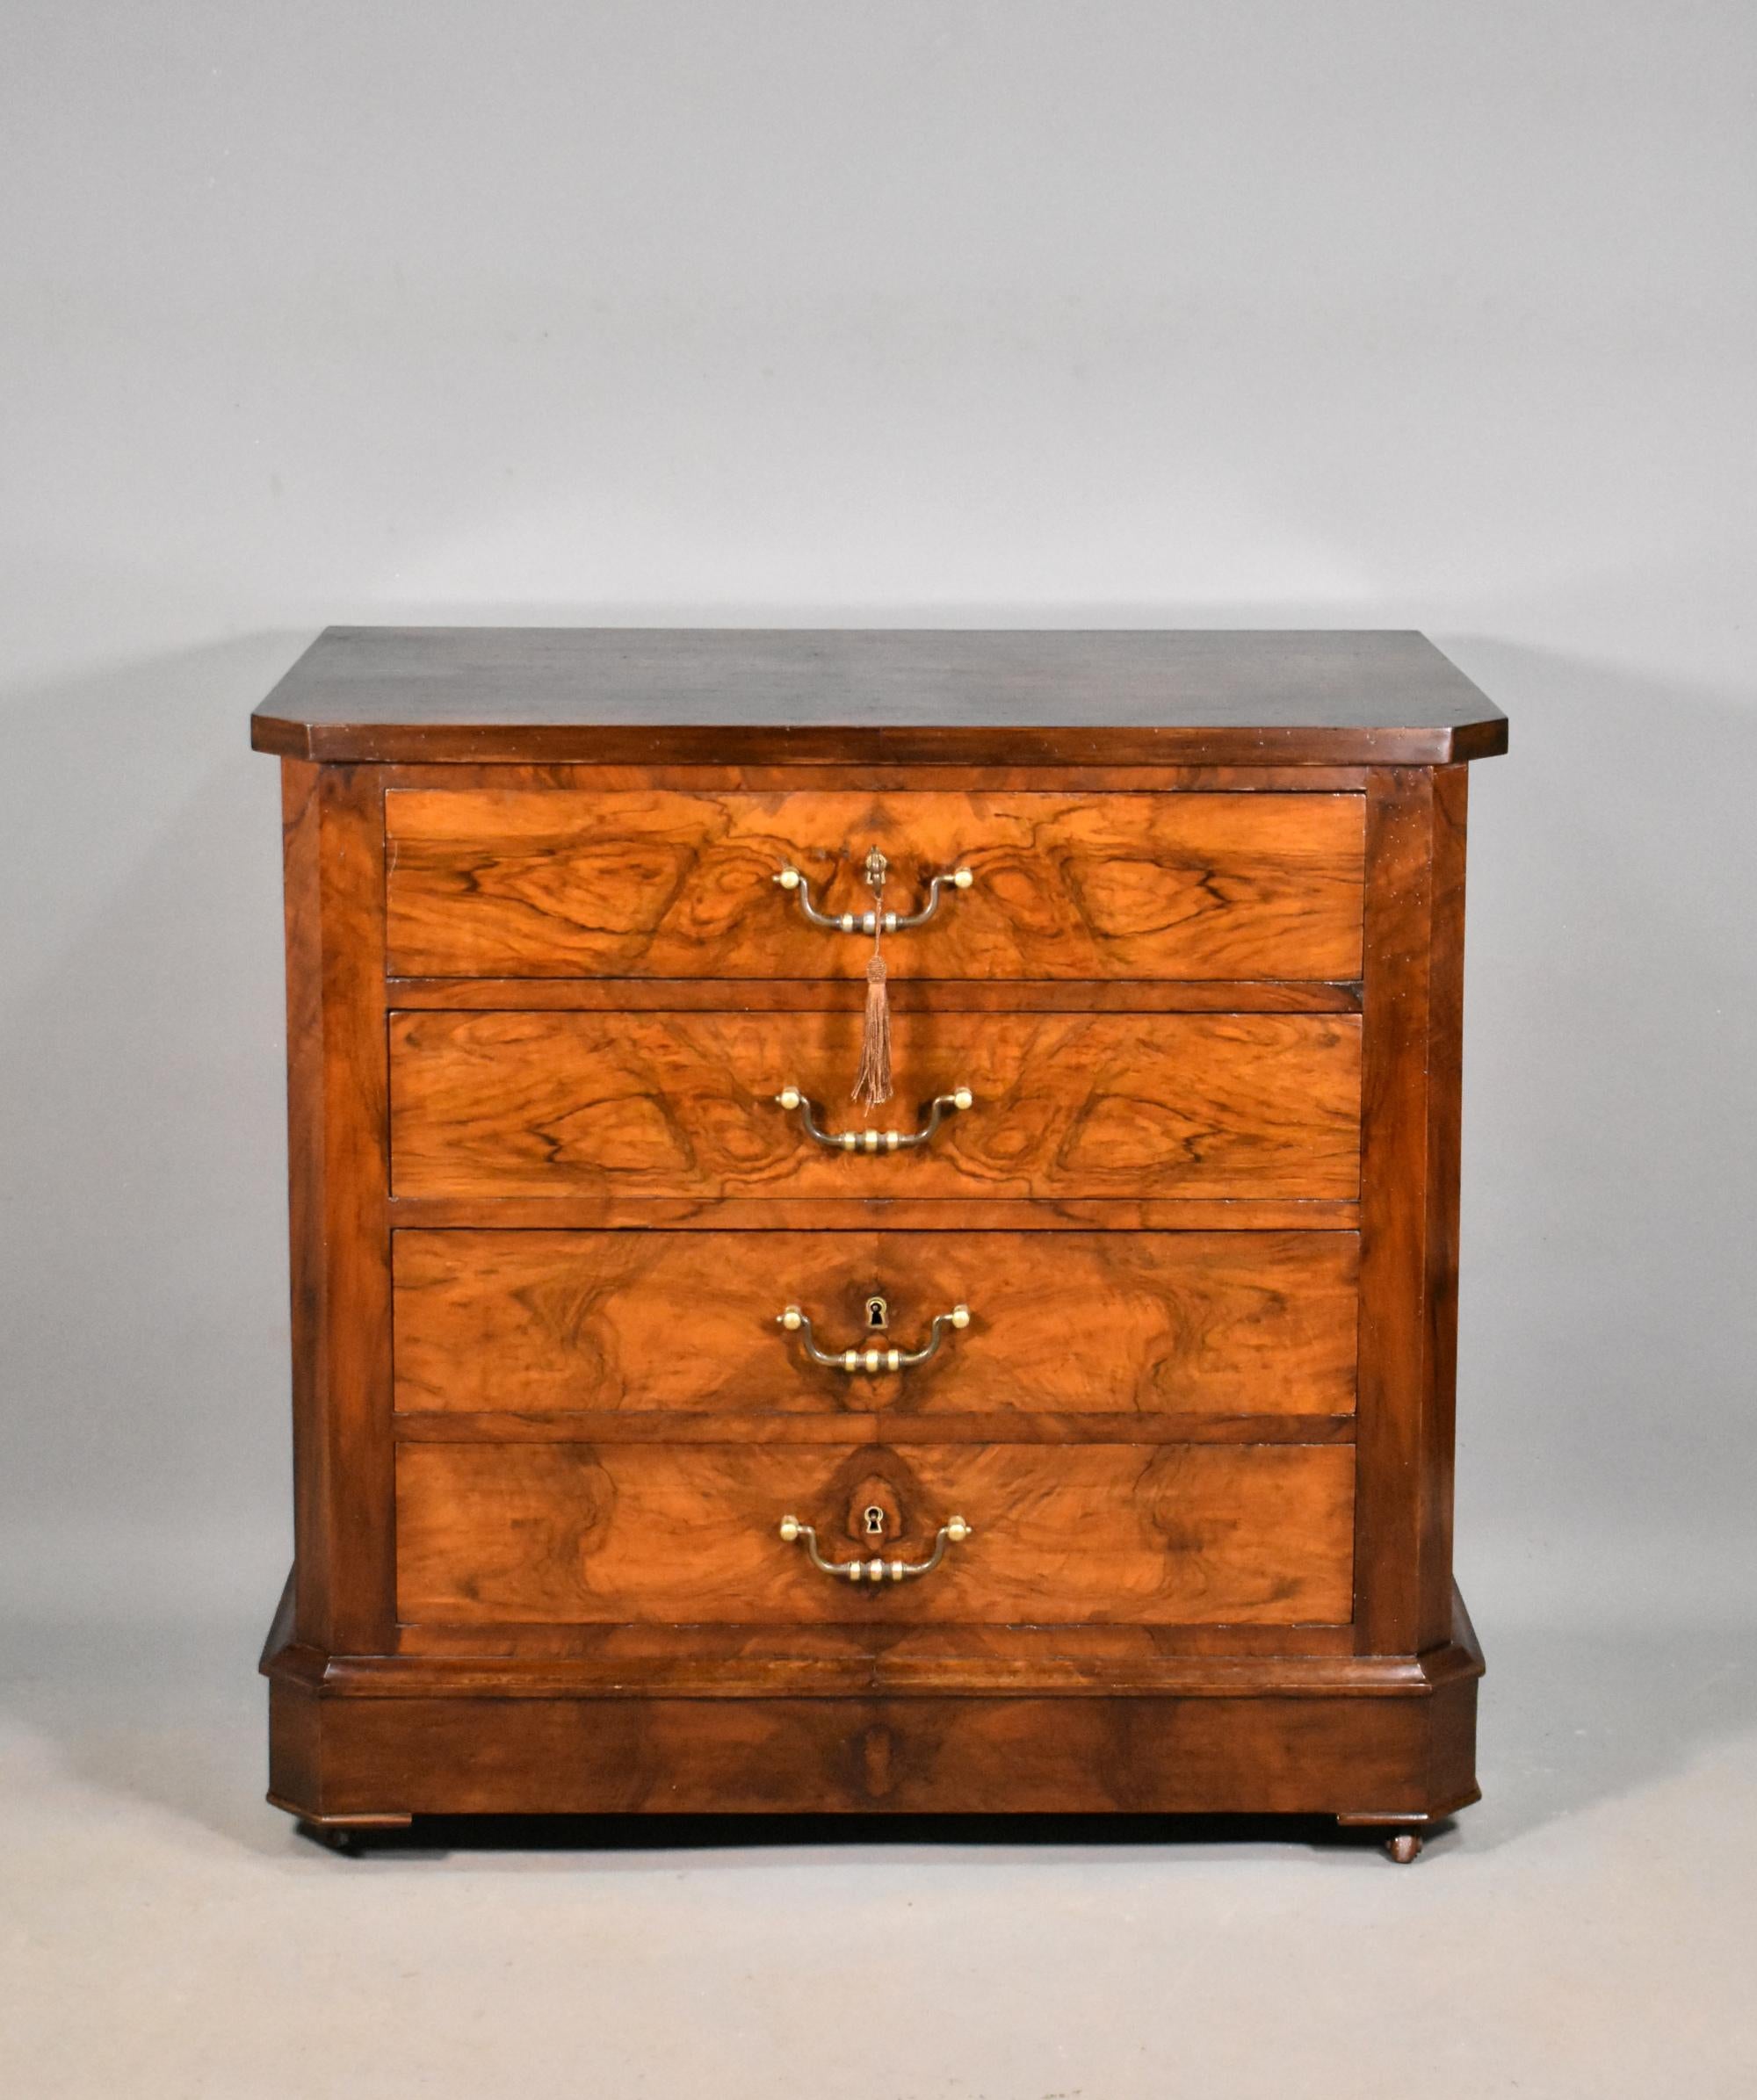 Antique French four drawer walnut commode Louis Philippe Style 

A well-proportioned antique commode featuring four equal-sized drawers of full width. 

The drawers are constructed in oak and have dovetail joints with a wild book-matched walnut